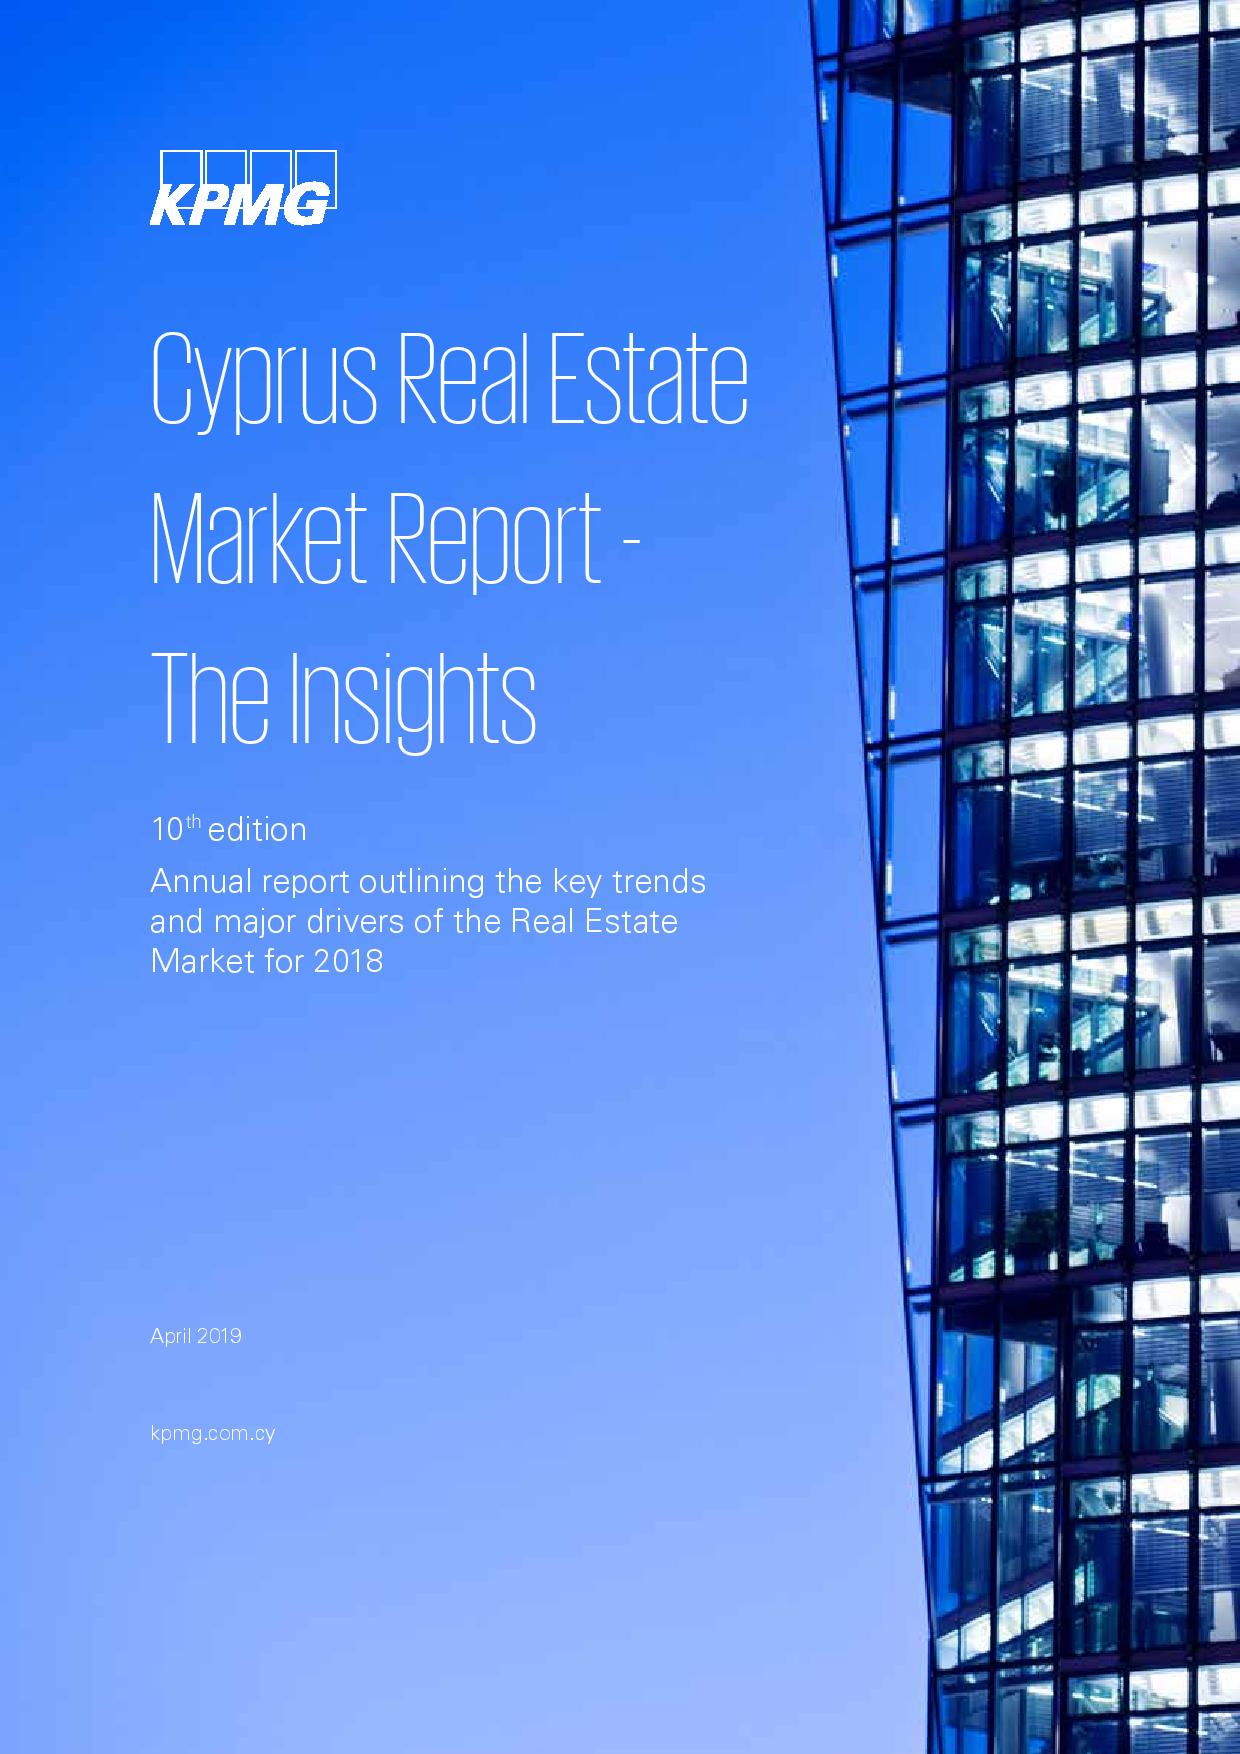 KPMG: Cyprus Real Estate Market Report - the insights